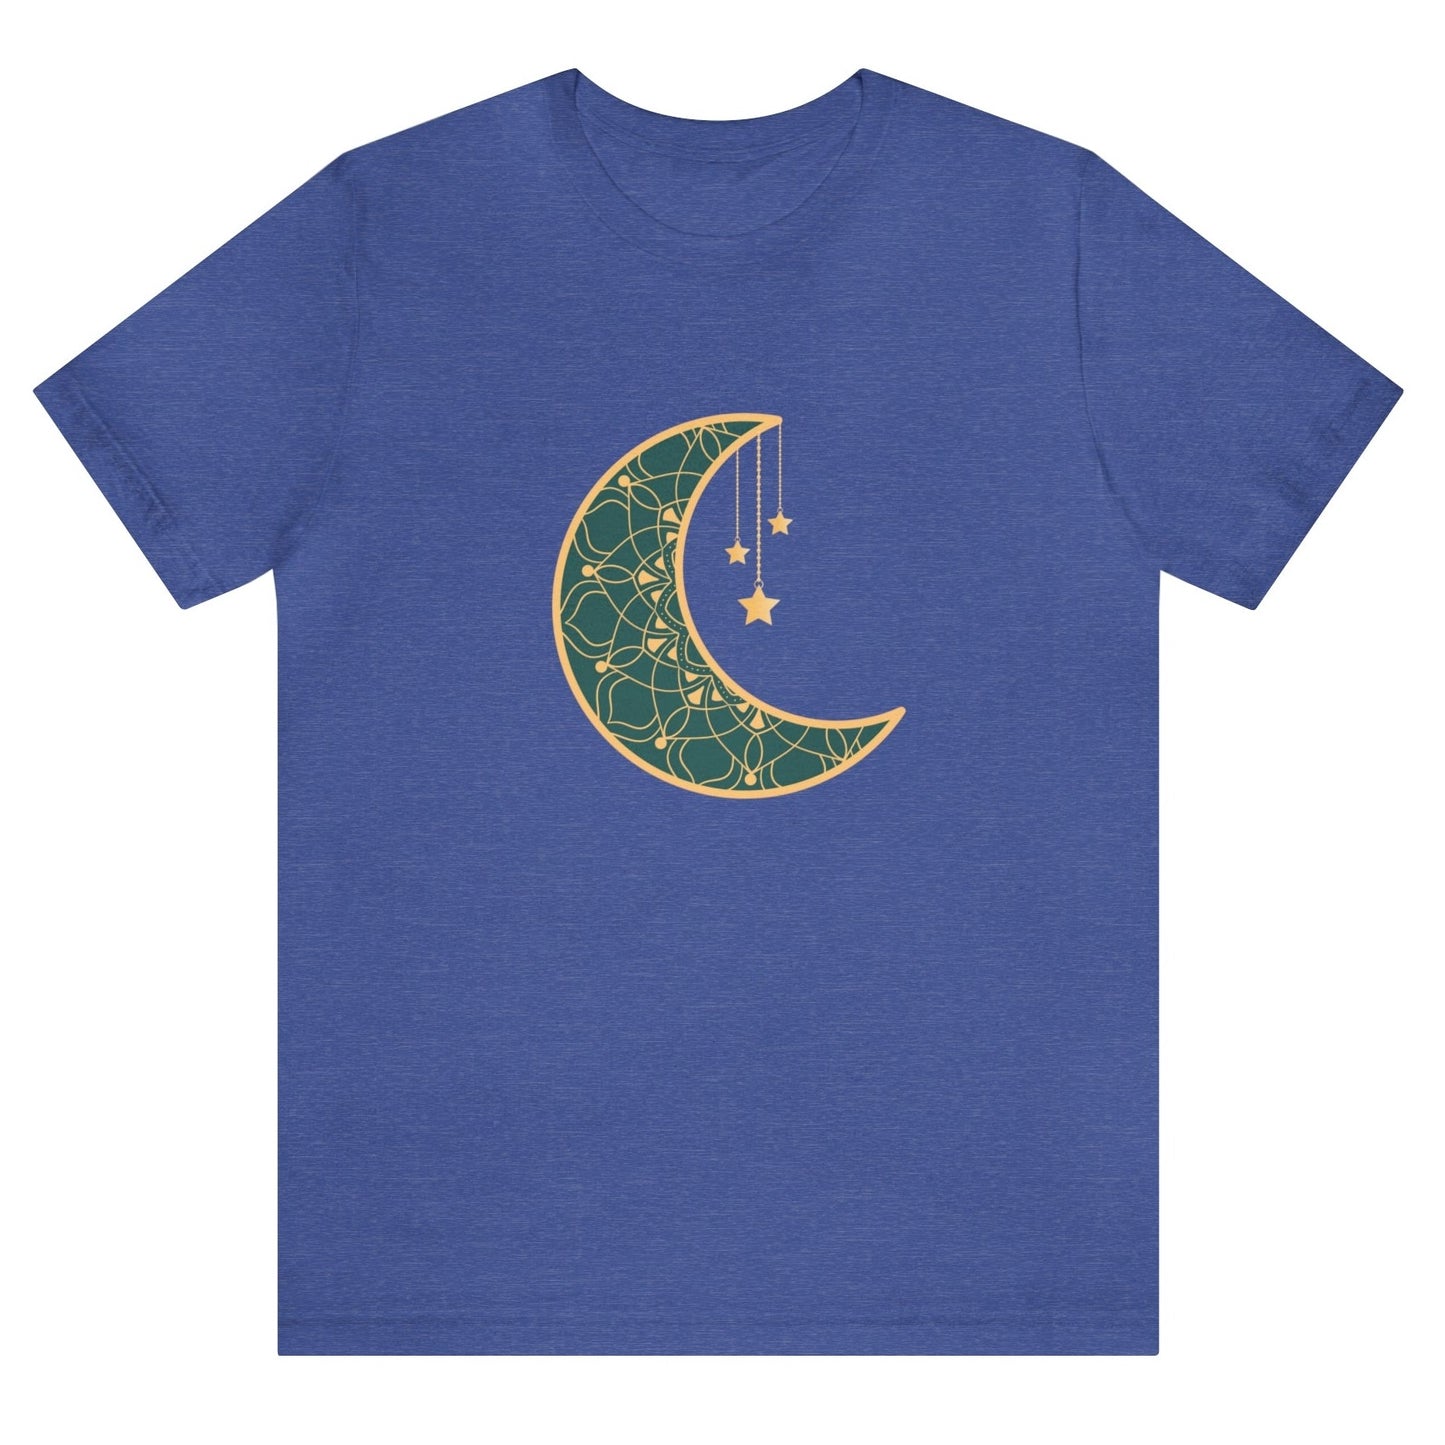 moonlit-charm-heather-true-royal-t-shirt-crescent-moon-with-hanging-stars